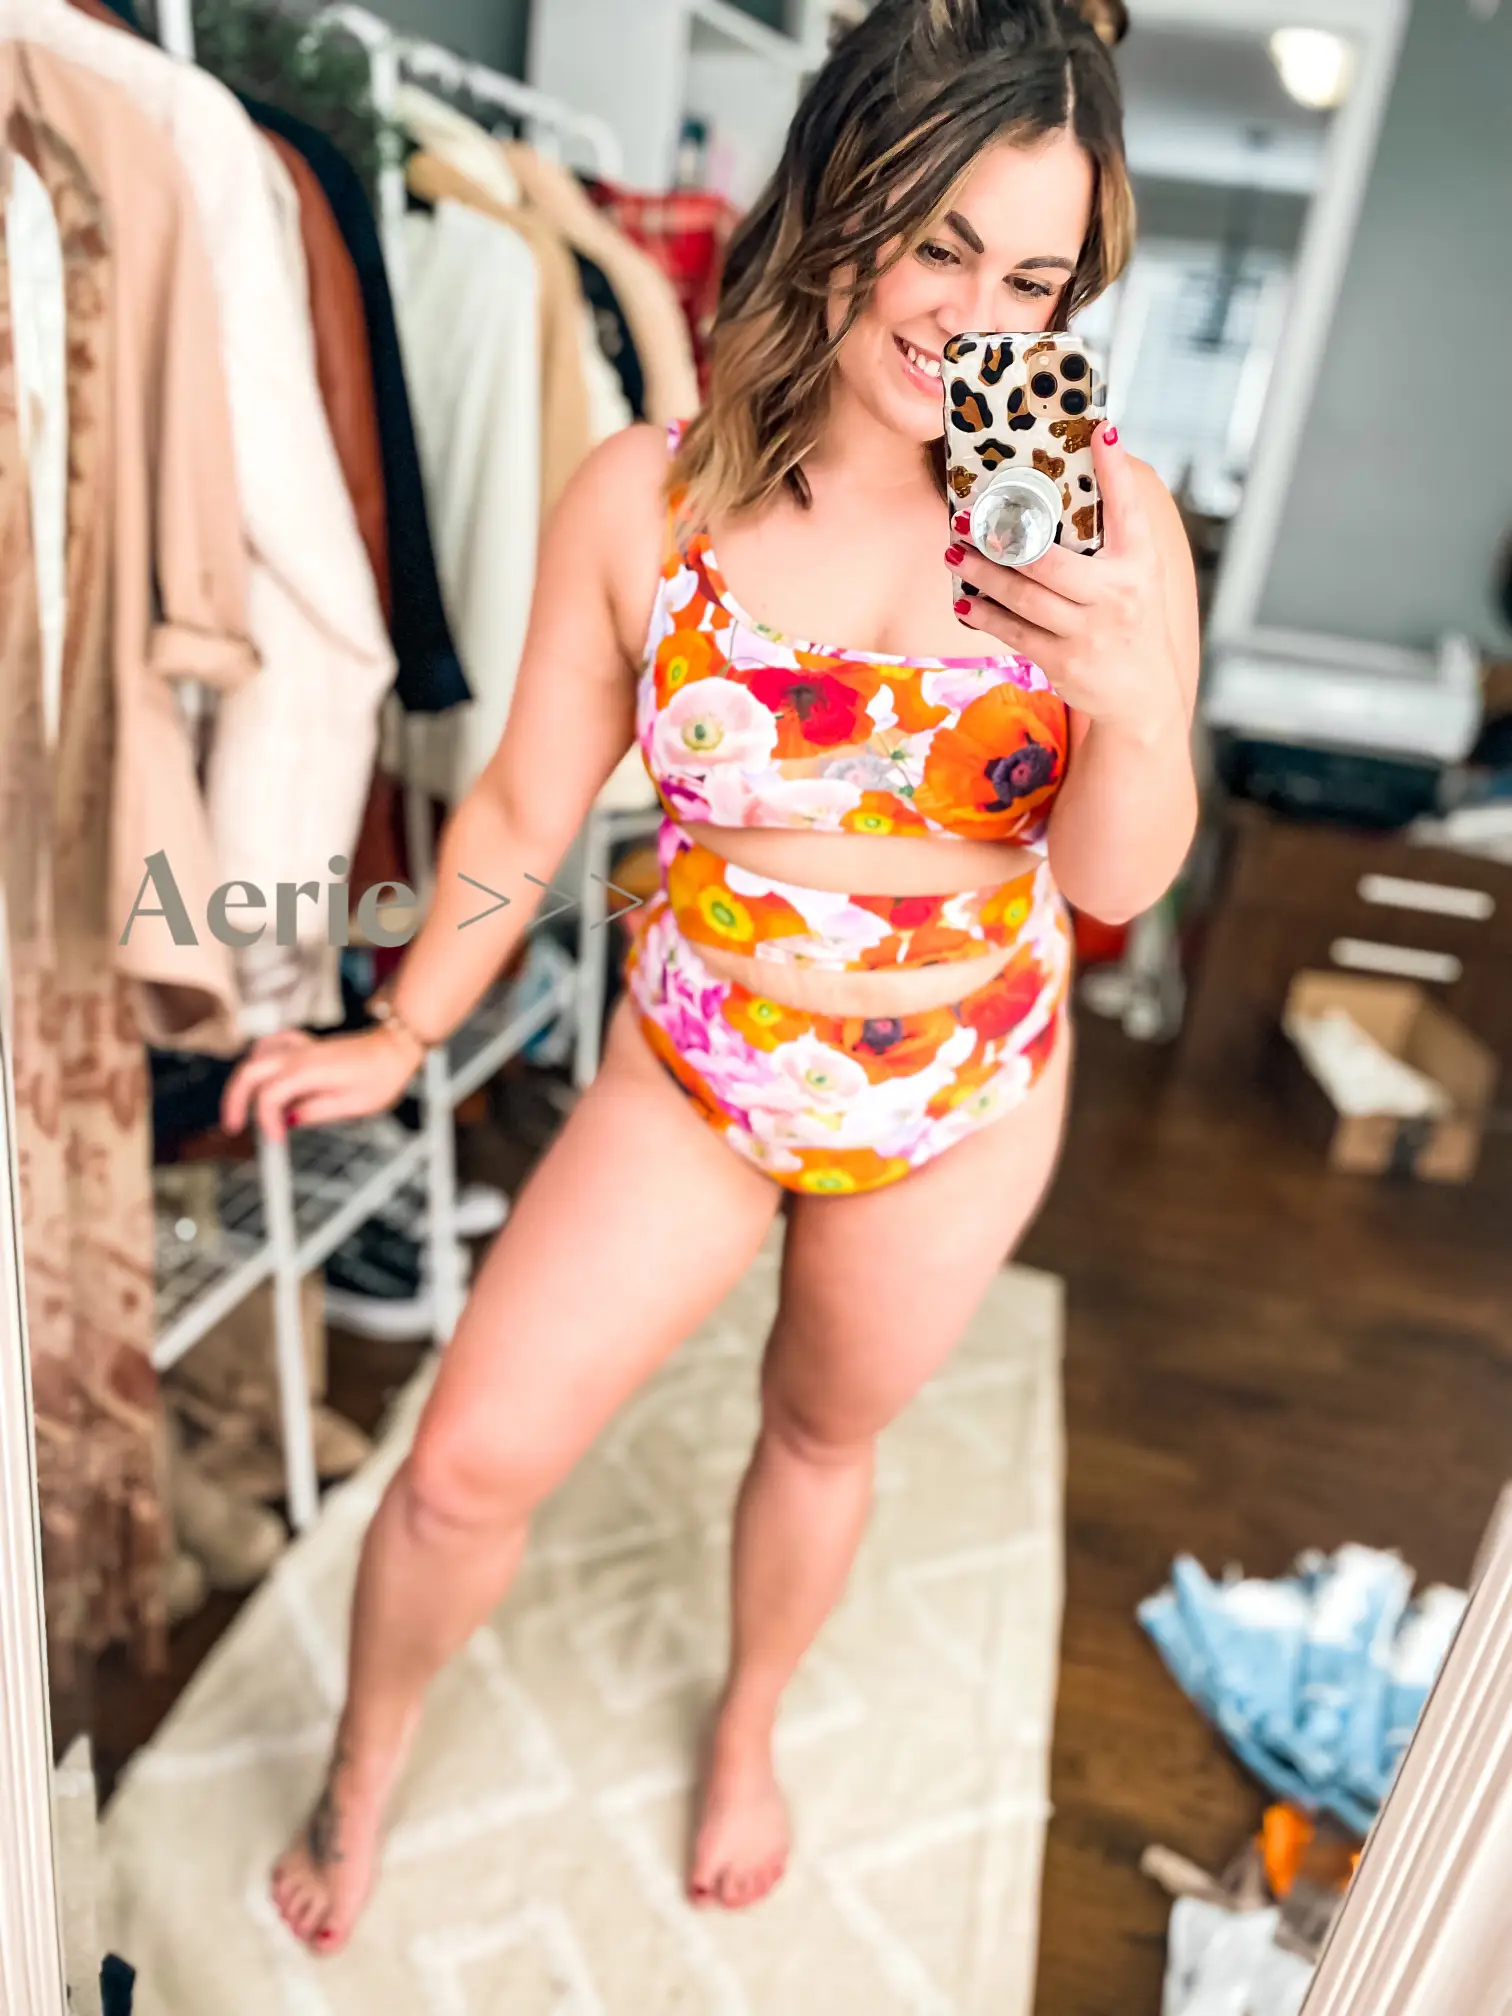 LIFE'S TOO SHORT TO WEAR BORING BIKINIS - FROM HATS TO HEELS